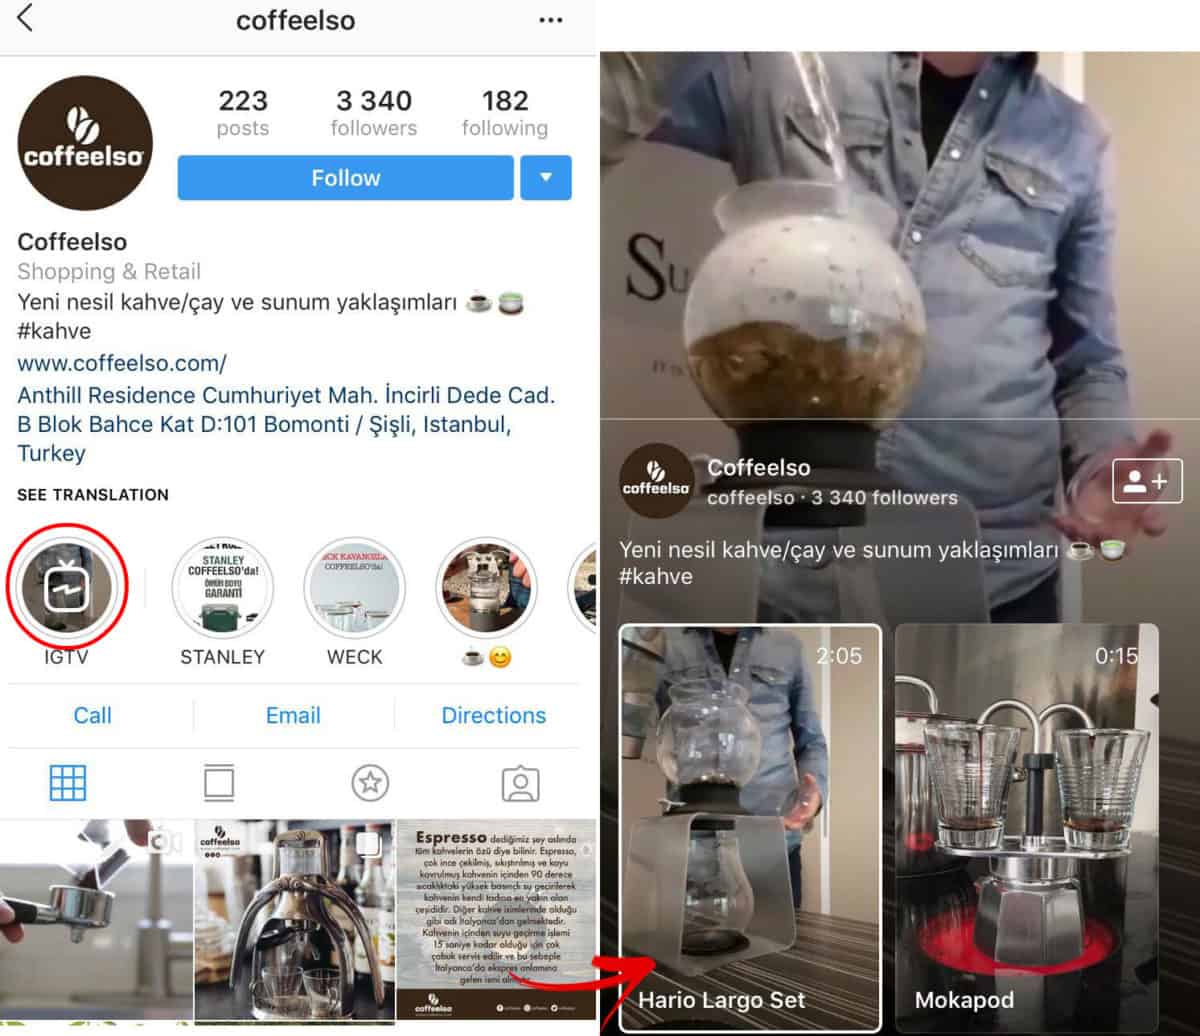 Coffeelso Instagram ephemeral content where they promote on IGTV 